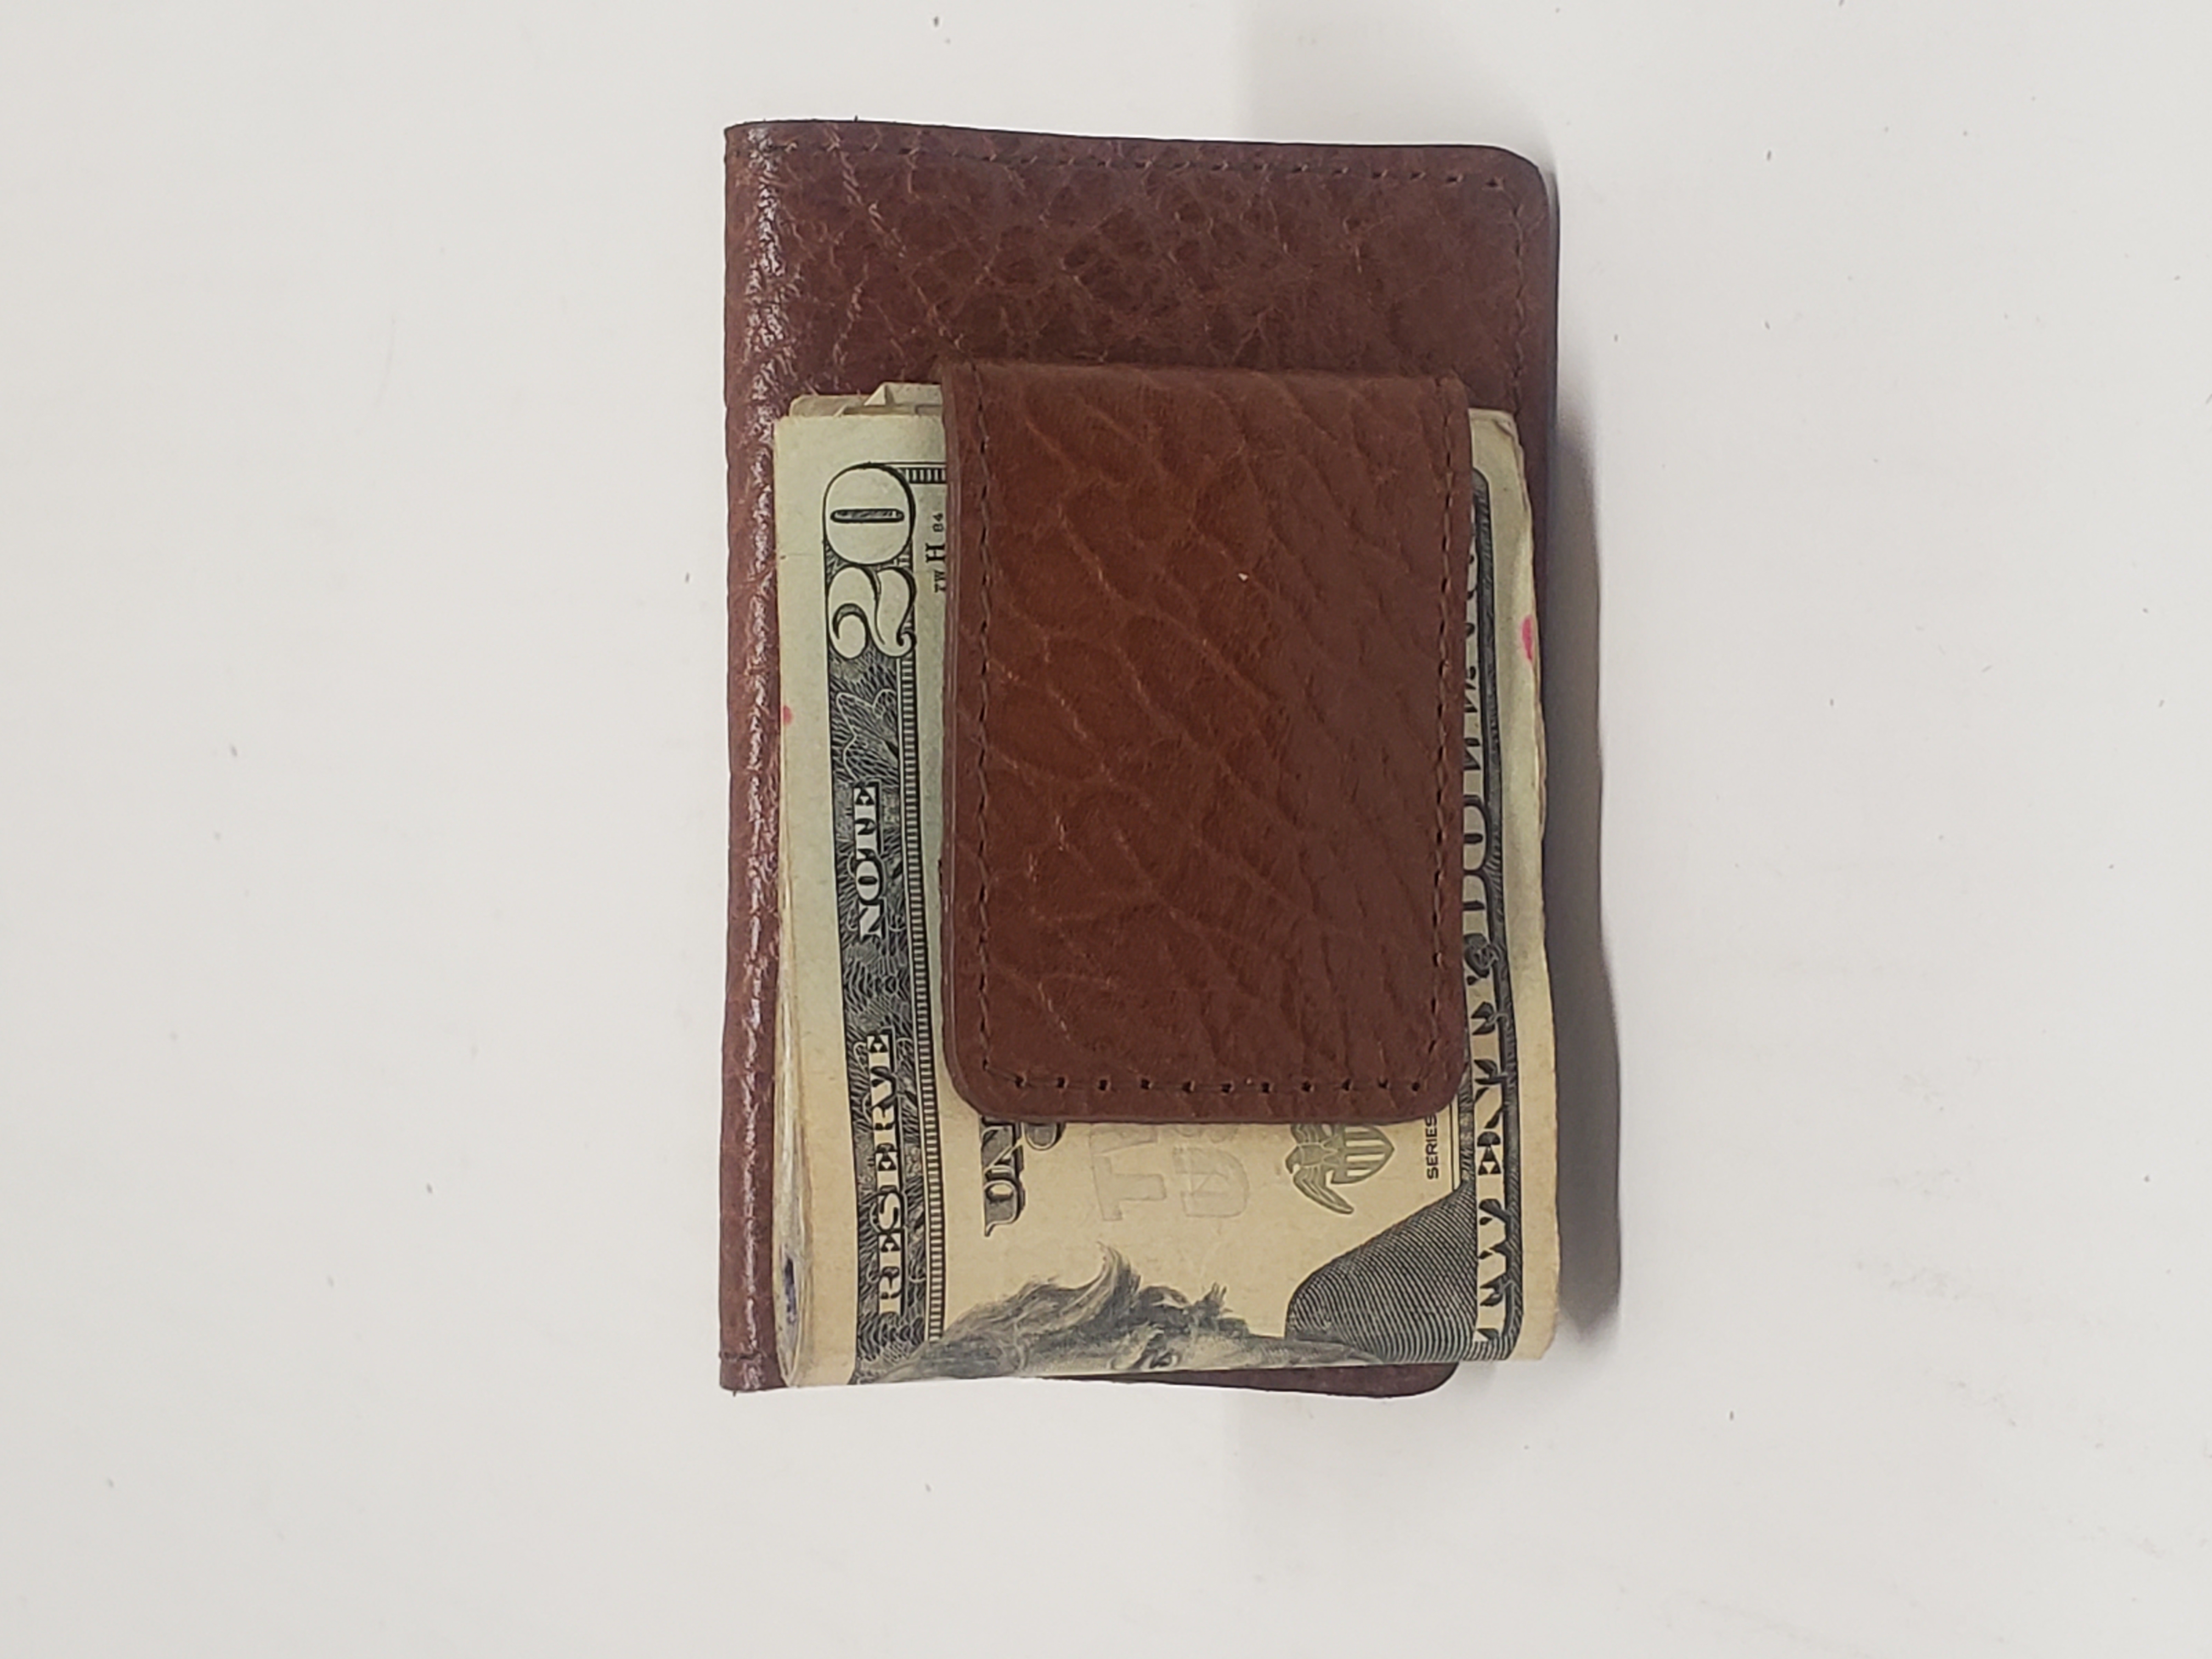 Mini Wallet / Card holder with Money clip (Magnetic $ Clip Combo)